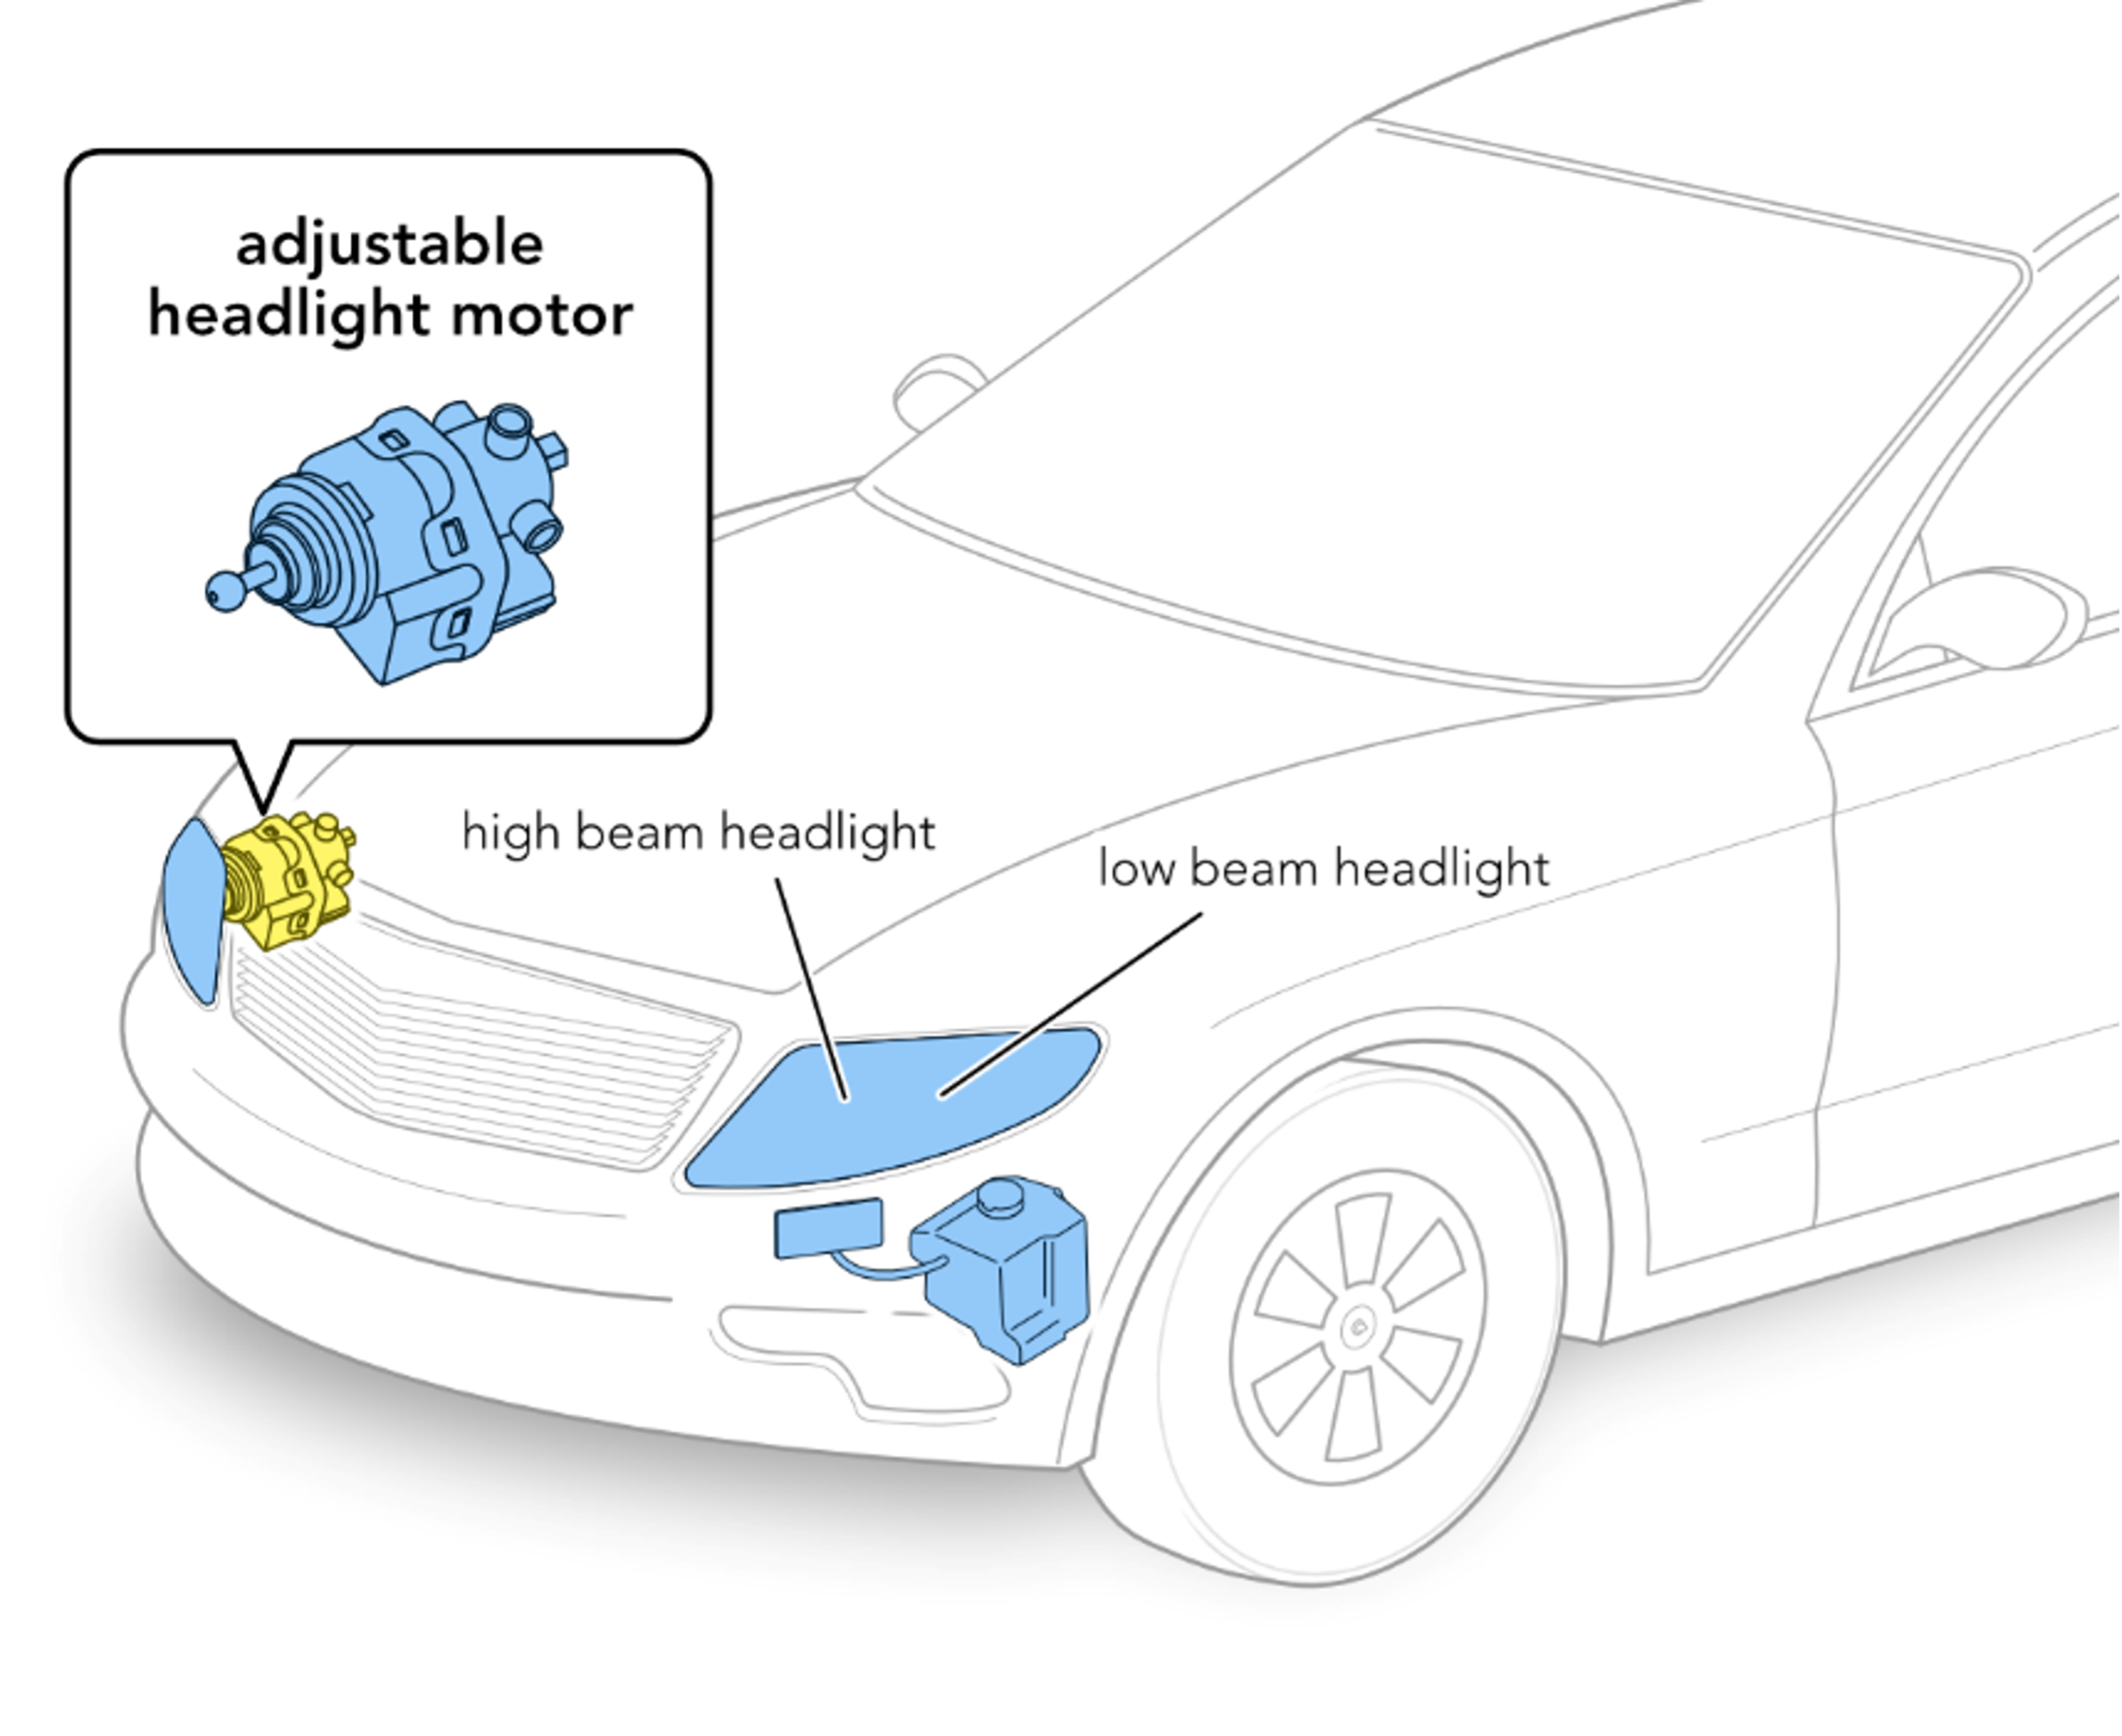 Figure 1. A diagram showing the components in a headlight assembly.